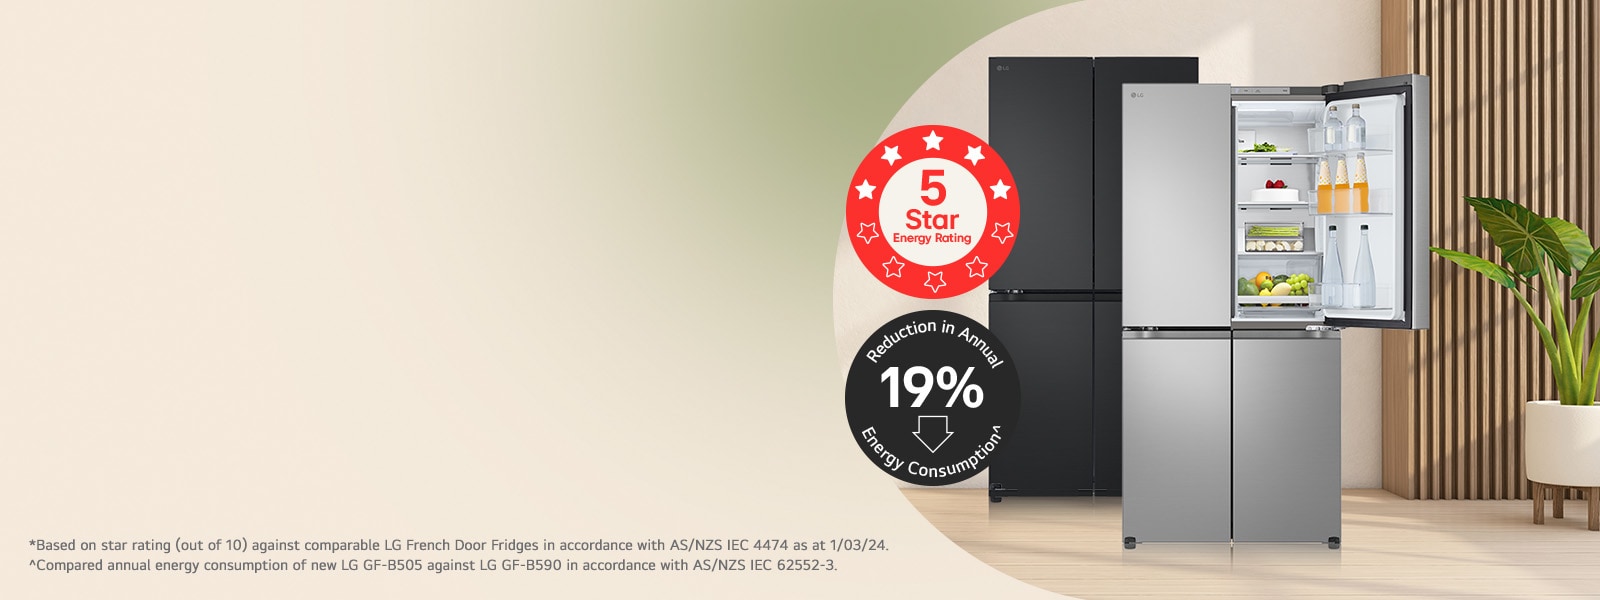 5 Star Energy Rated More Stars. More Savings. Introducing LG's highest Energy Star Rated French Door Fridges over 500L.*